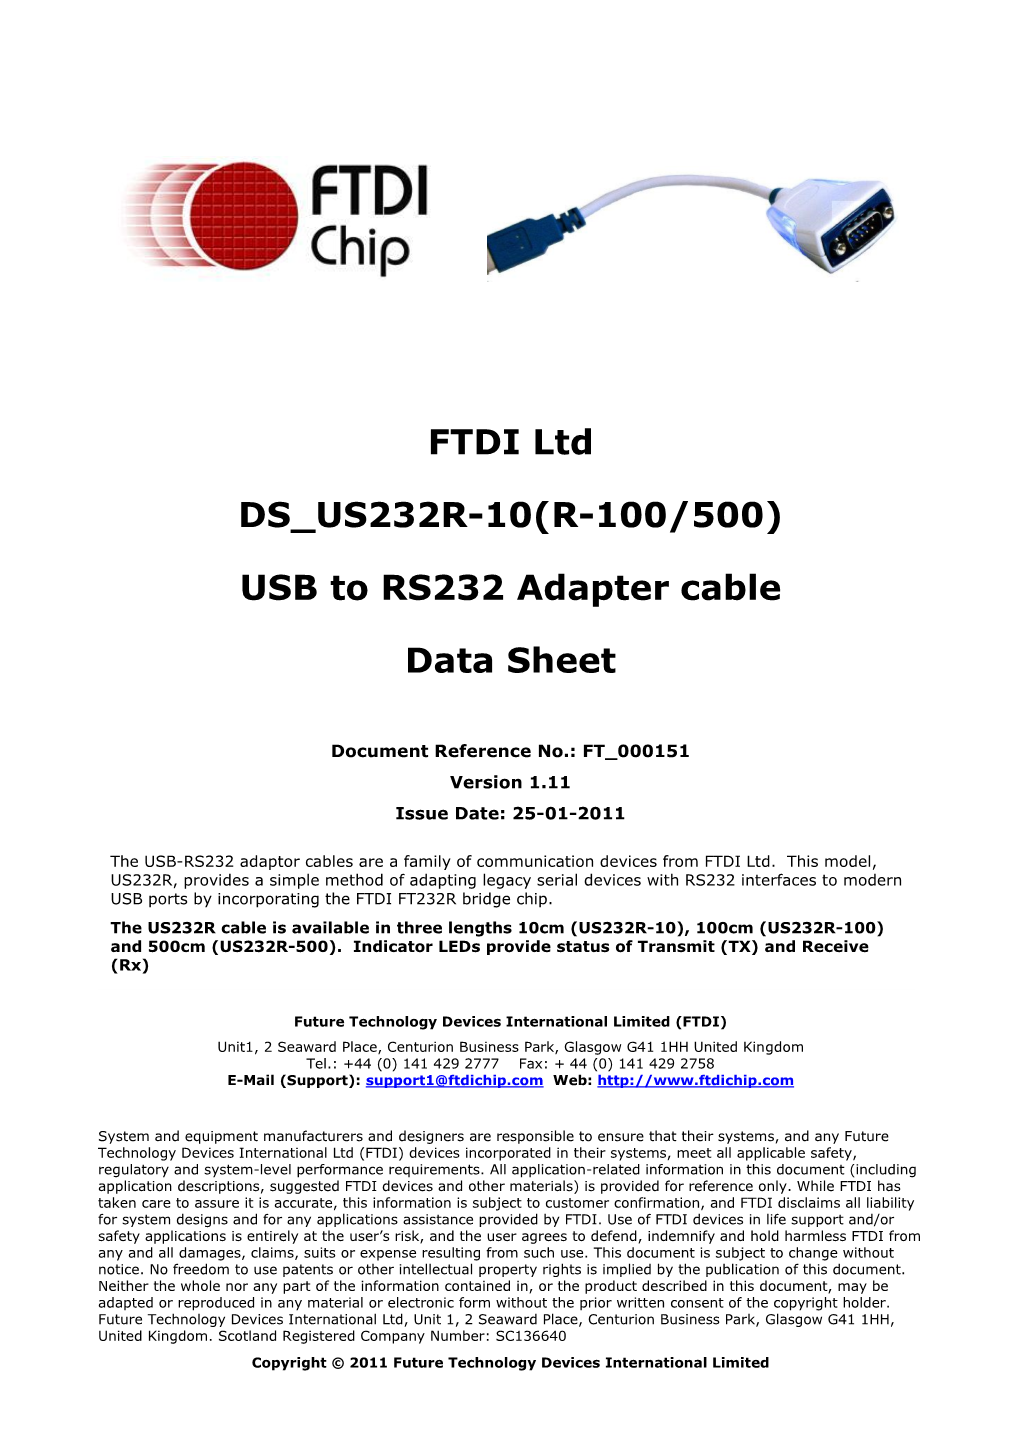 FTDI Ltd DS US232R-10(R-100/500) USB to RS232 Adapter Cable Data Sheet